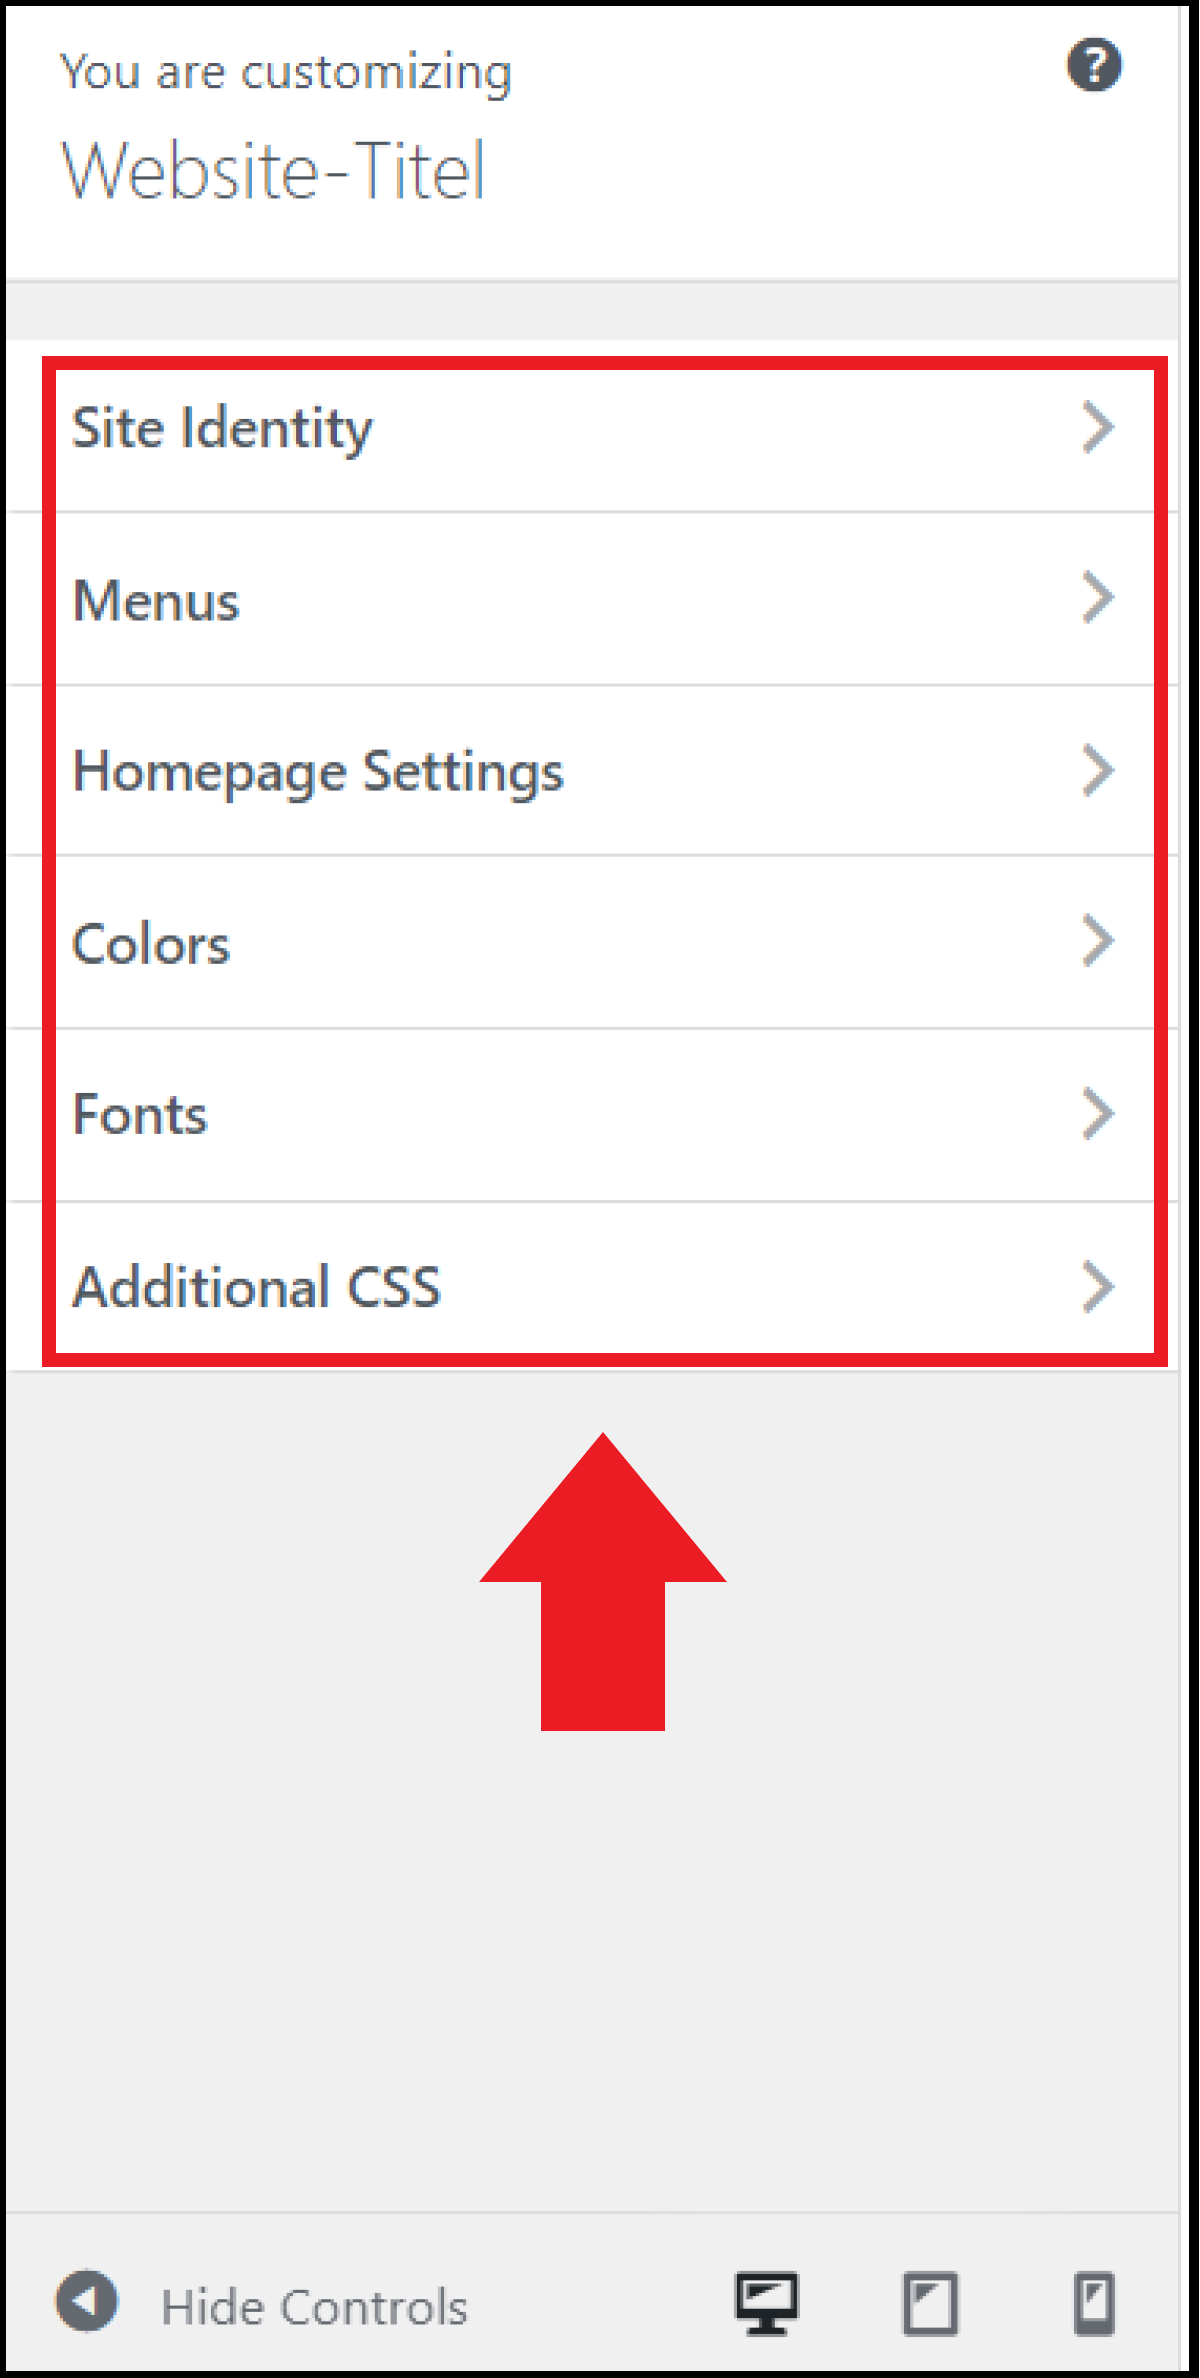 The configurations of the “Customize” menu